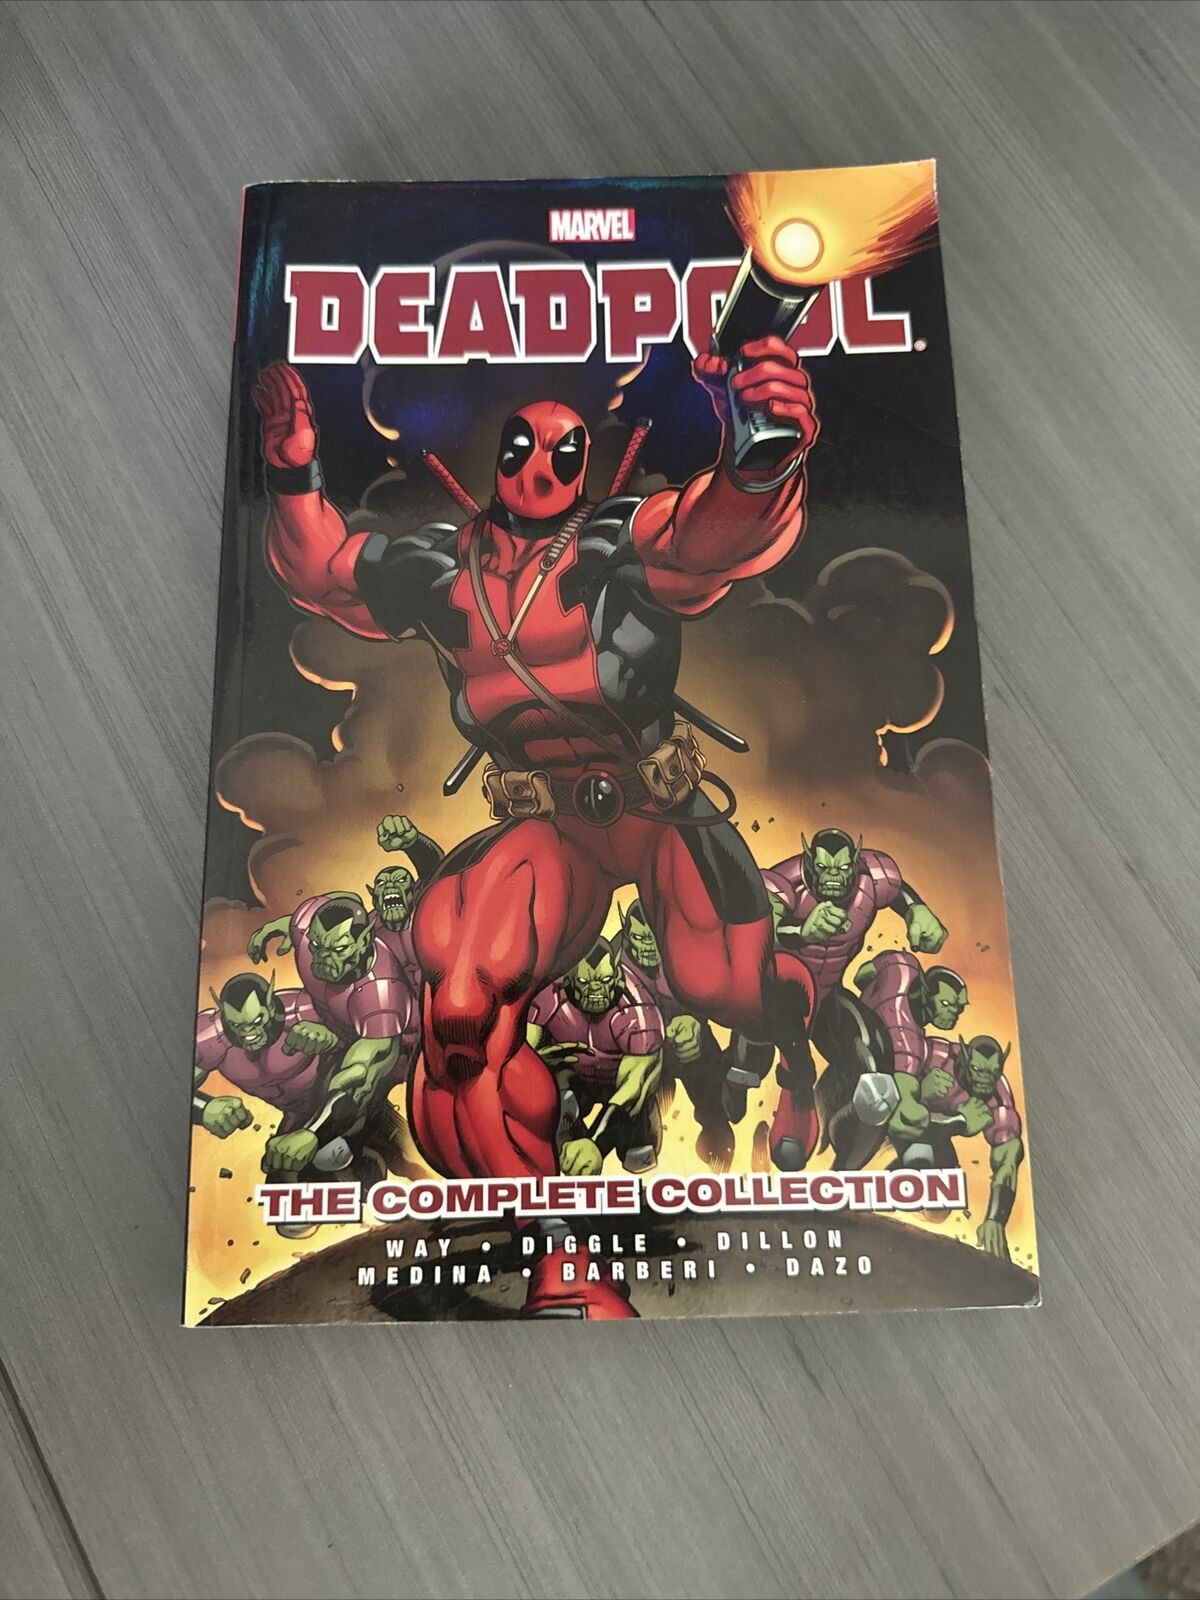 Deadpool by Daniel Way: the Complete Collection #1 (Marvel Comics 2013)